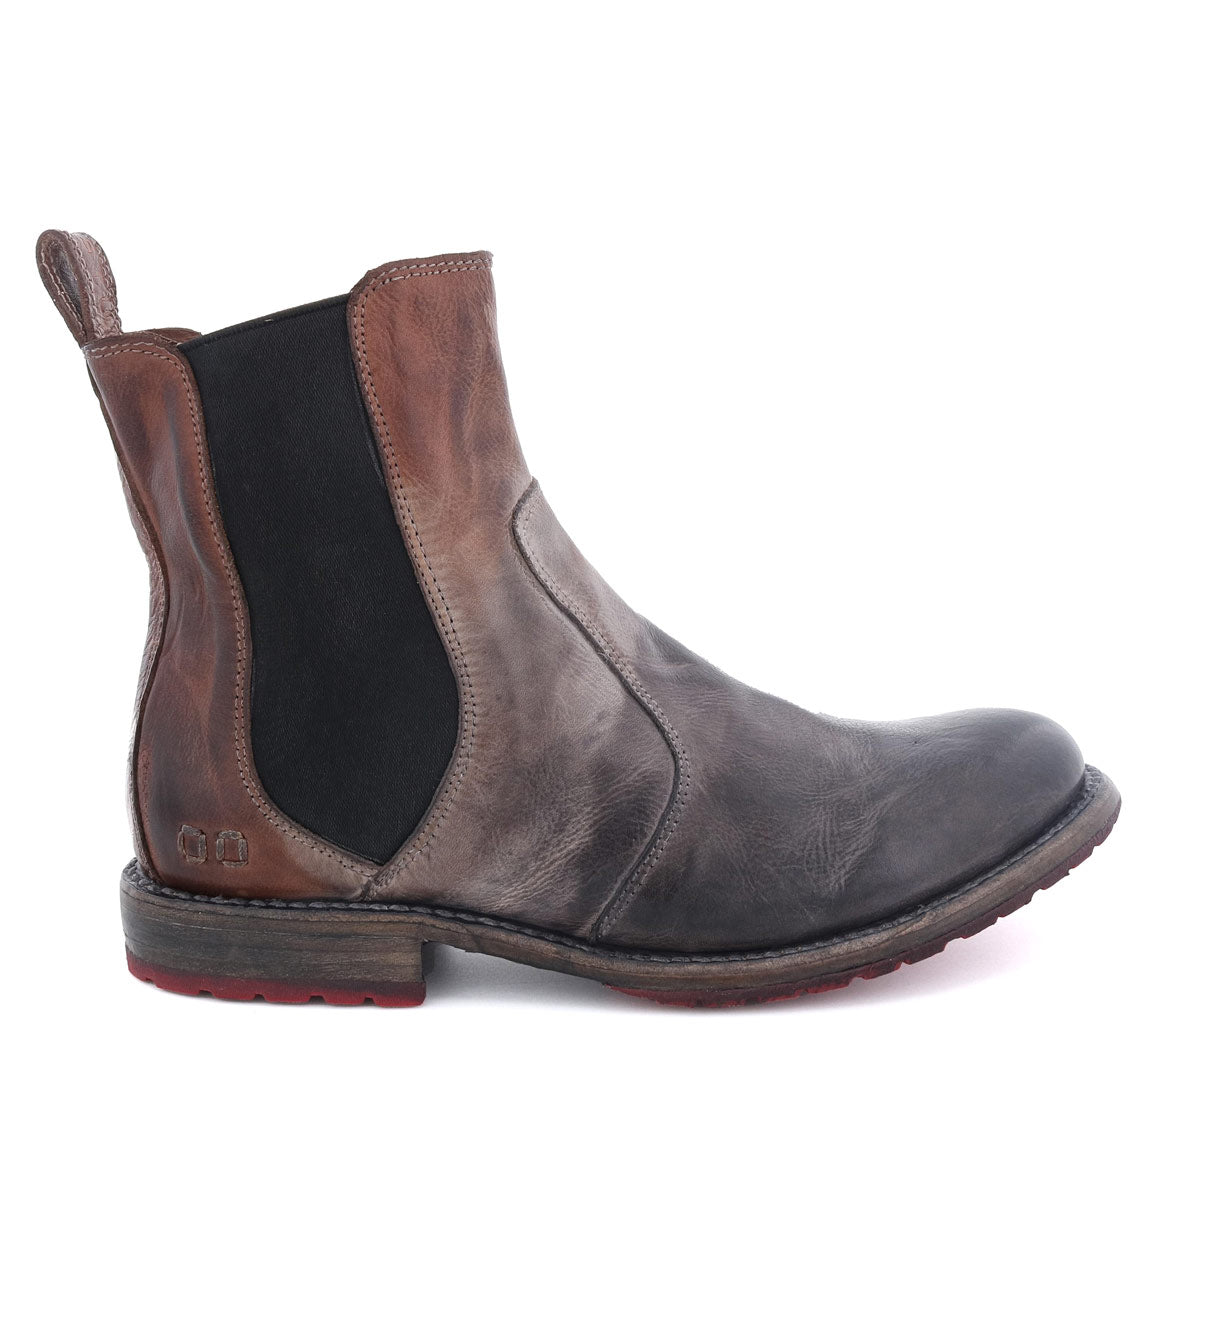 A Nandi pure leather chelsea boot by Bed Stu.